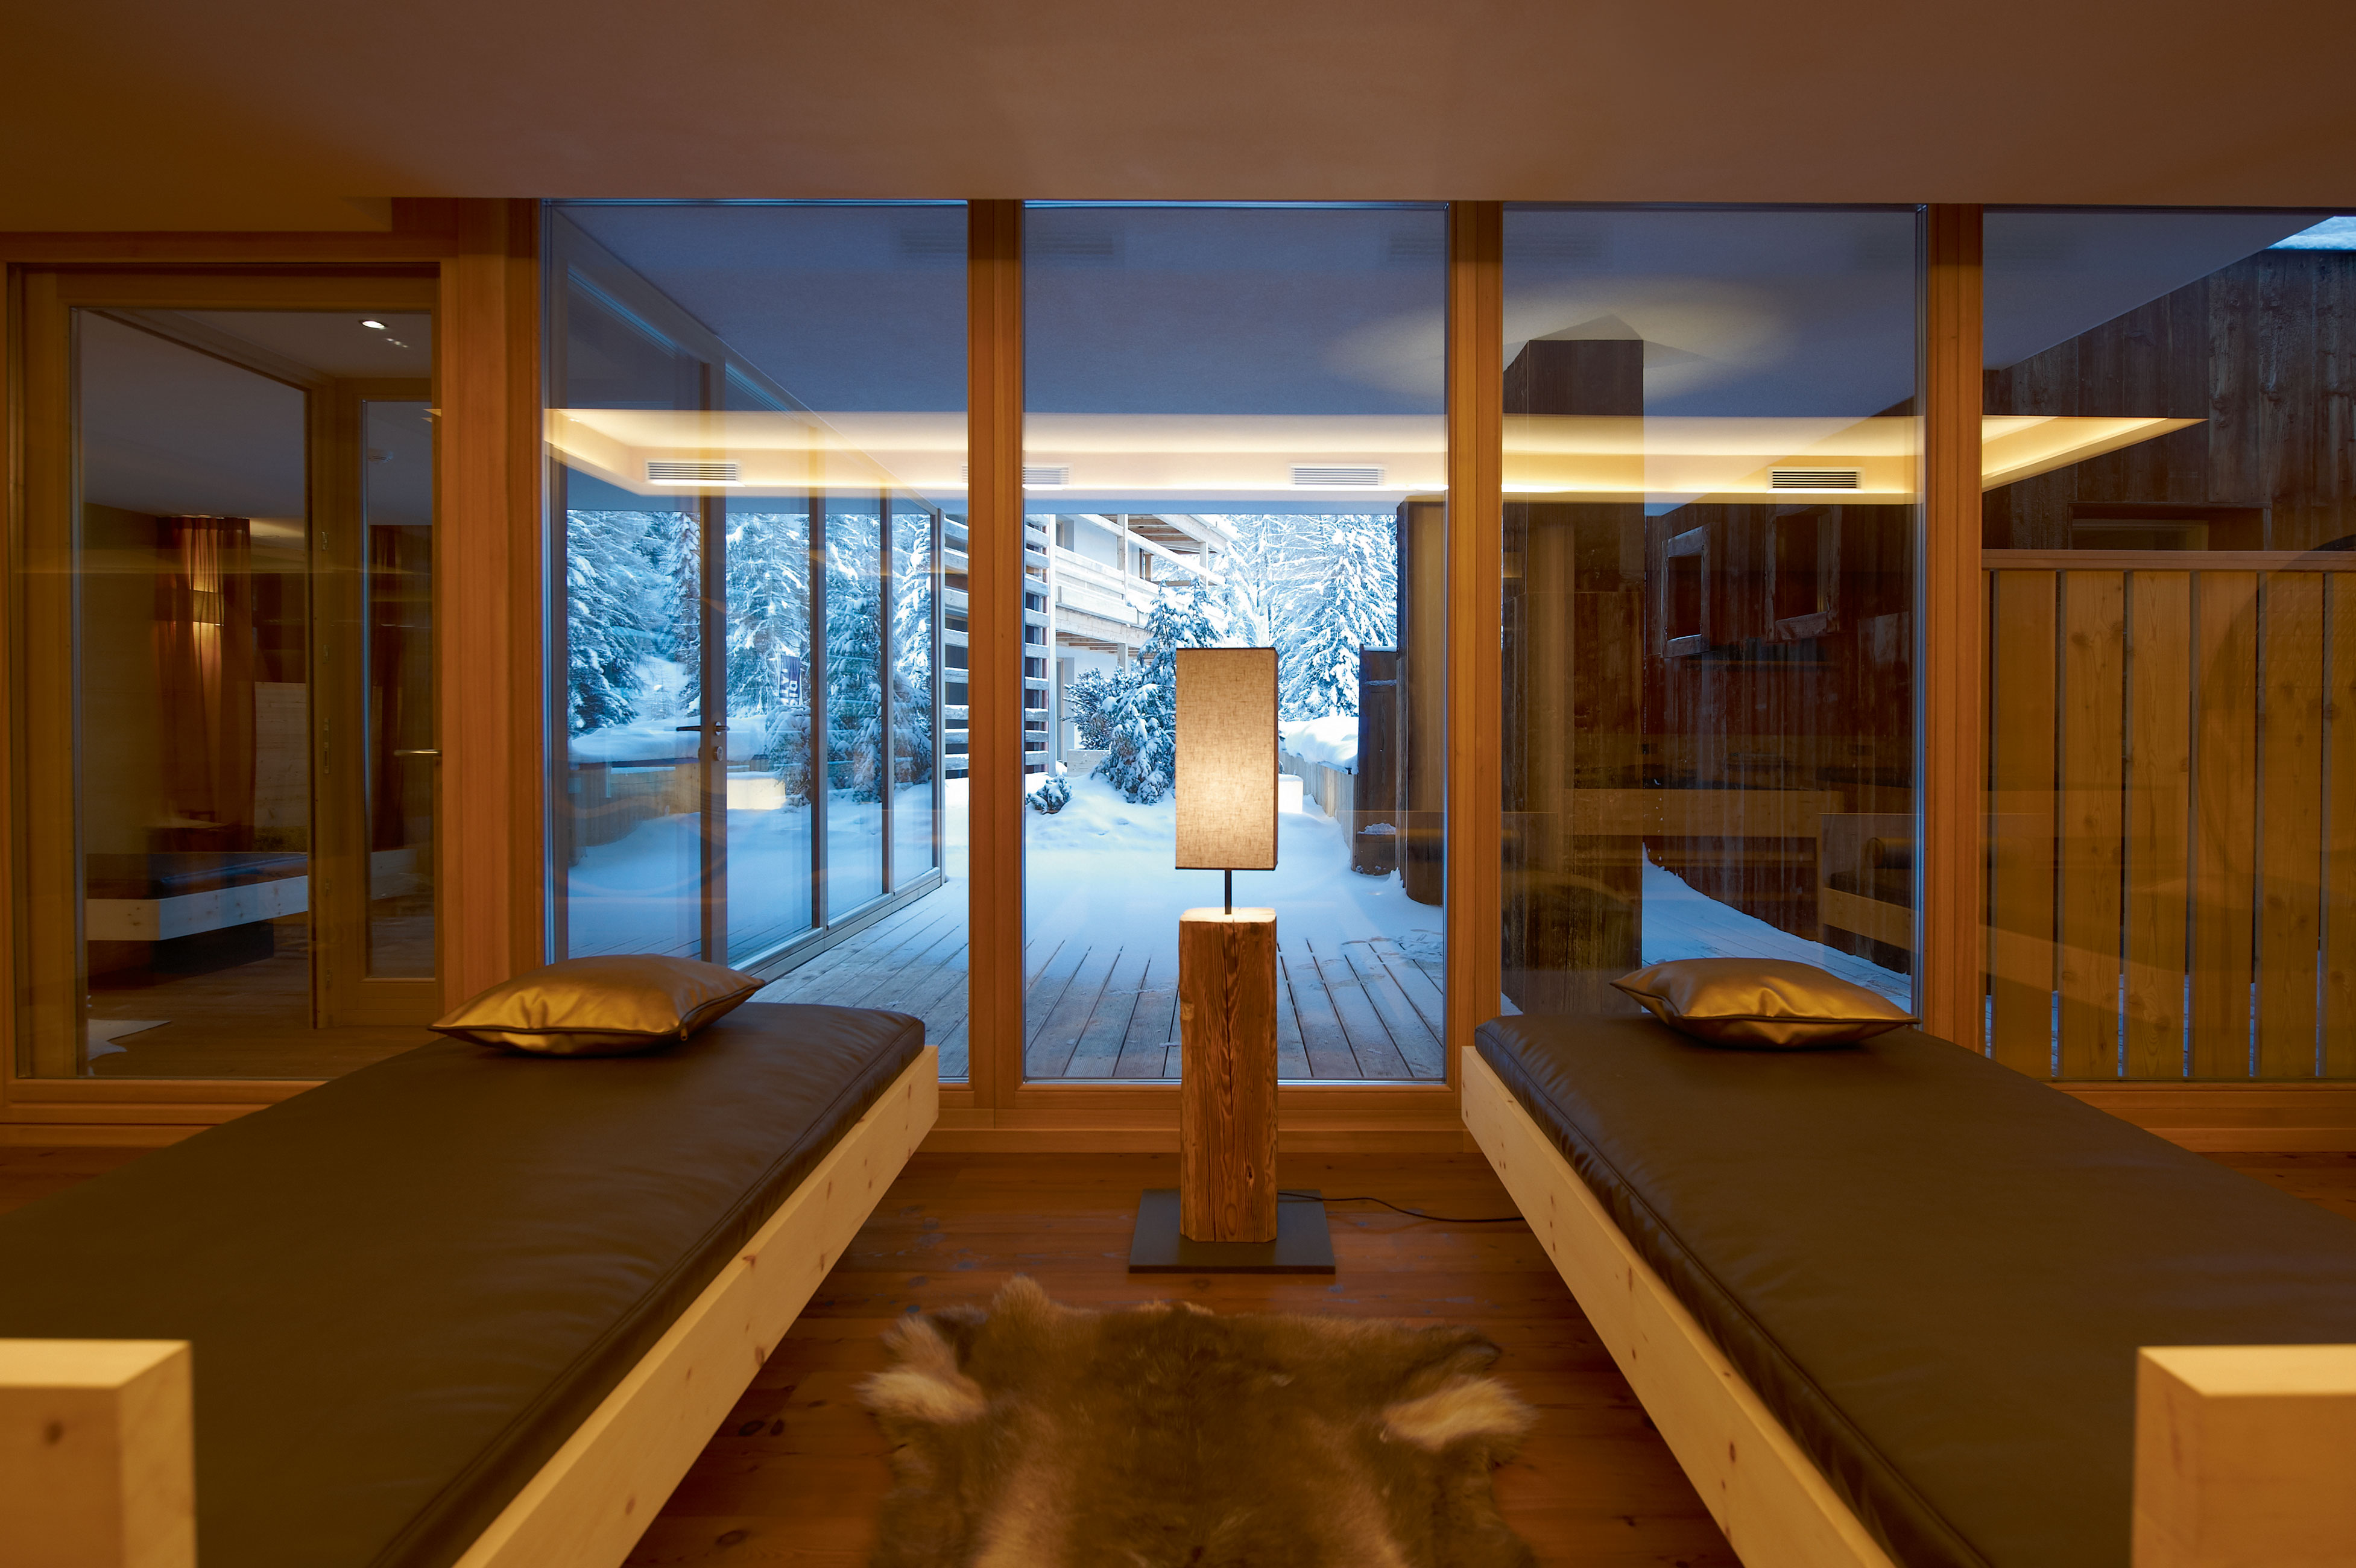 Spa treatment tables at Lagació Hotel Mountain Residence, South Tyrol, Italy | Mr & Mrs Smith